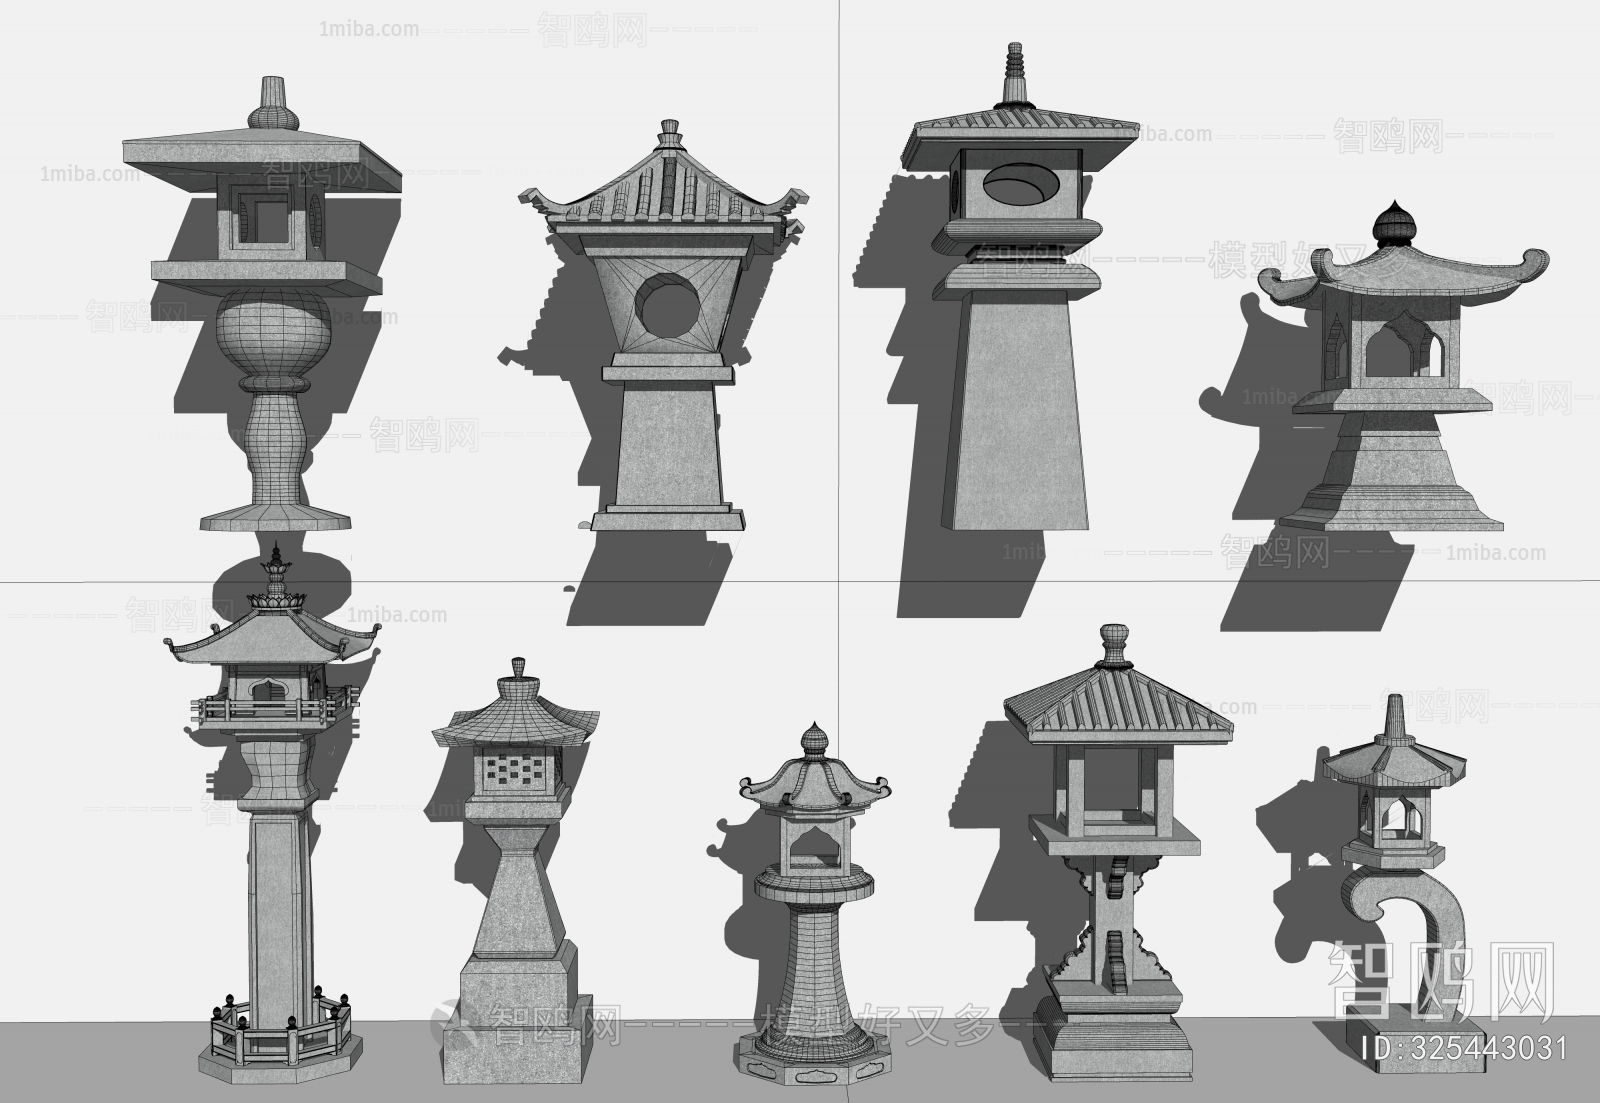 Chinese Style Japanese Style Outdoor Light